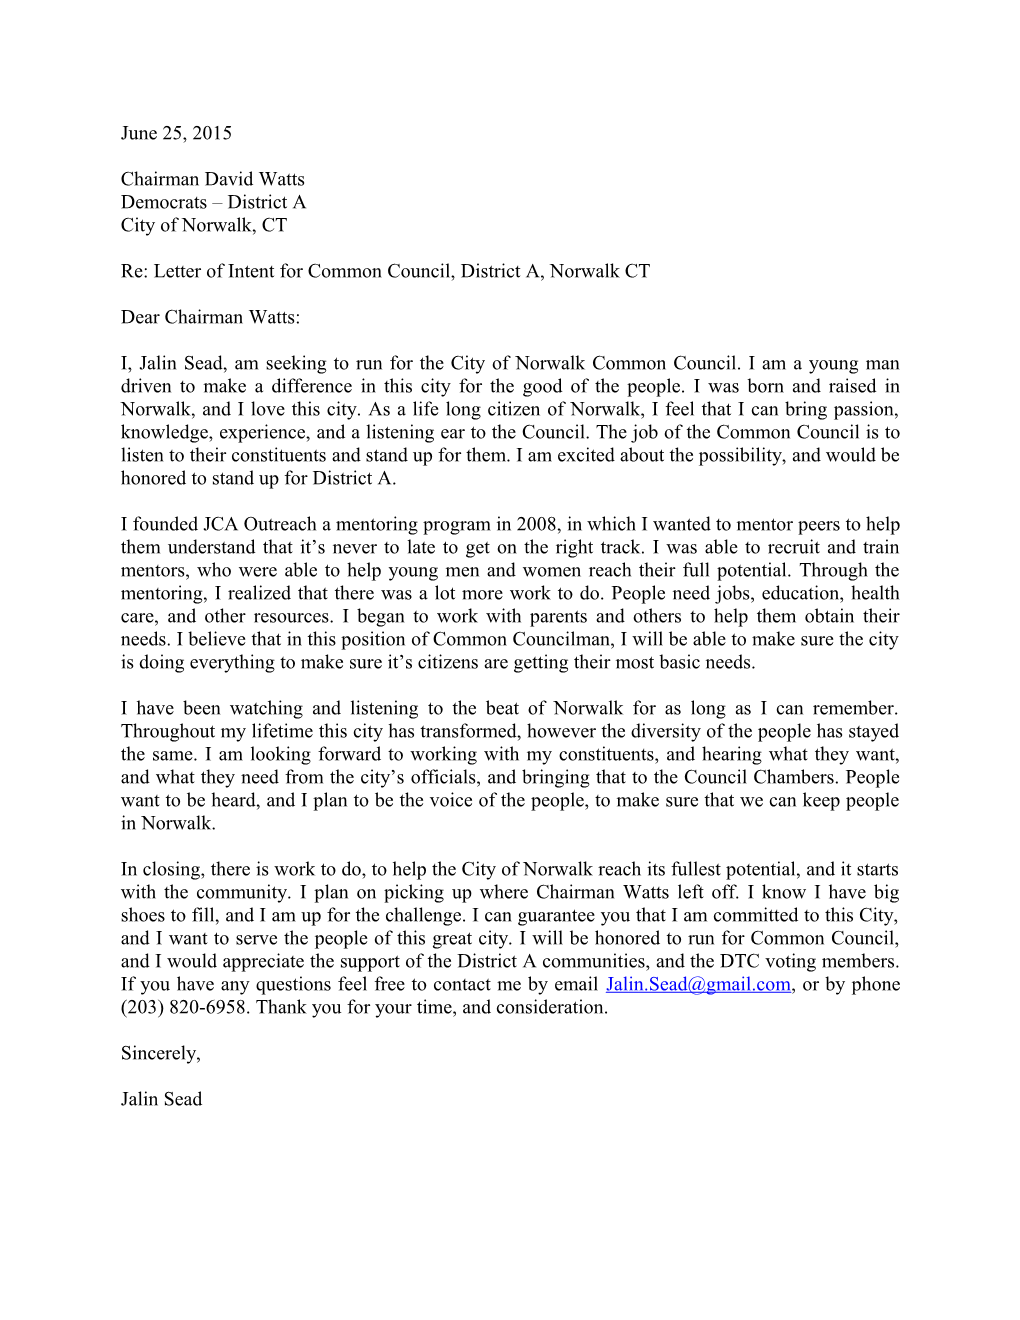 Re: Letter of Intent for Common Council, District A, Norwalk CT